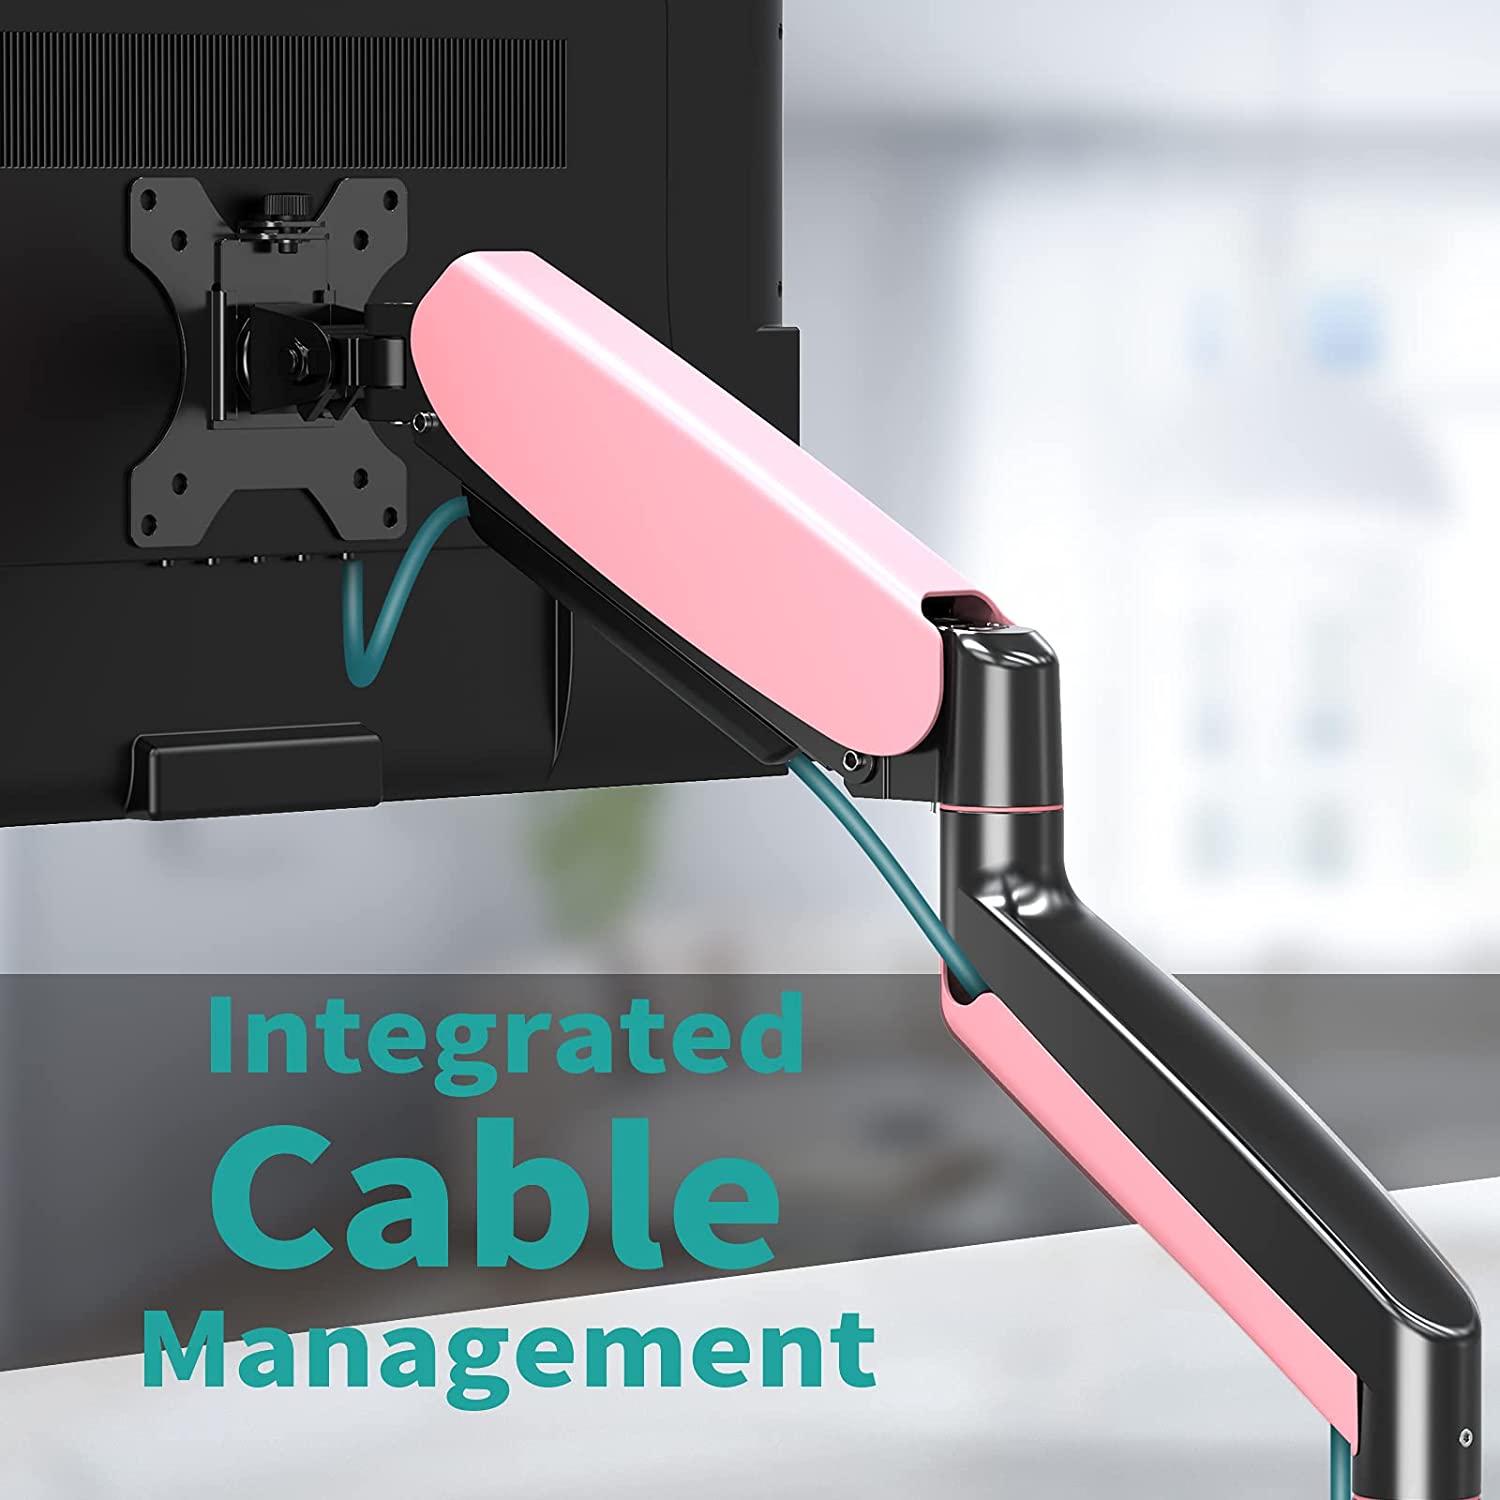 Single Arm pink computer monitor mount with integrated cable management for organizing the desk